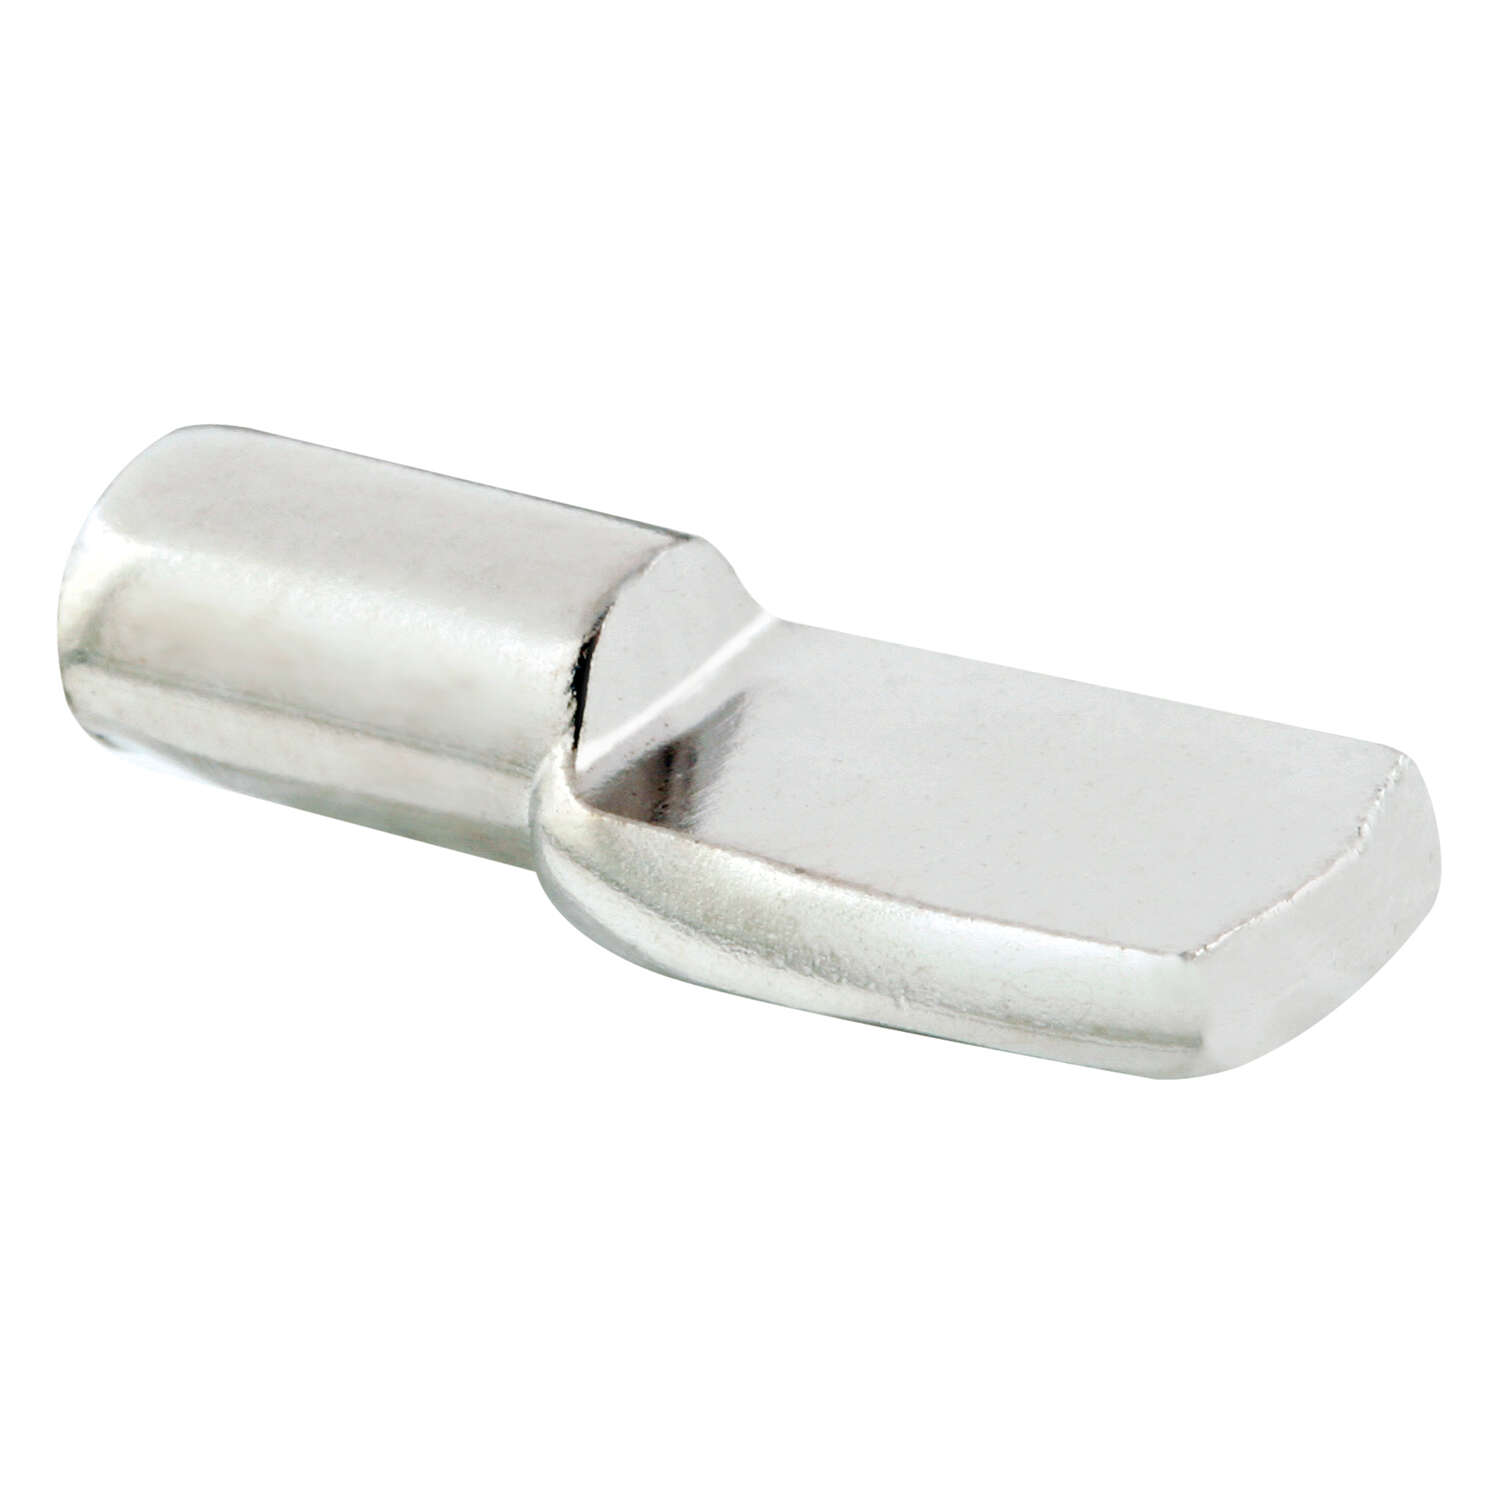 Shelf Support Peg 8 pegs Stainless Steel 